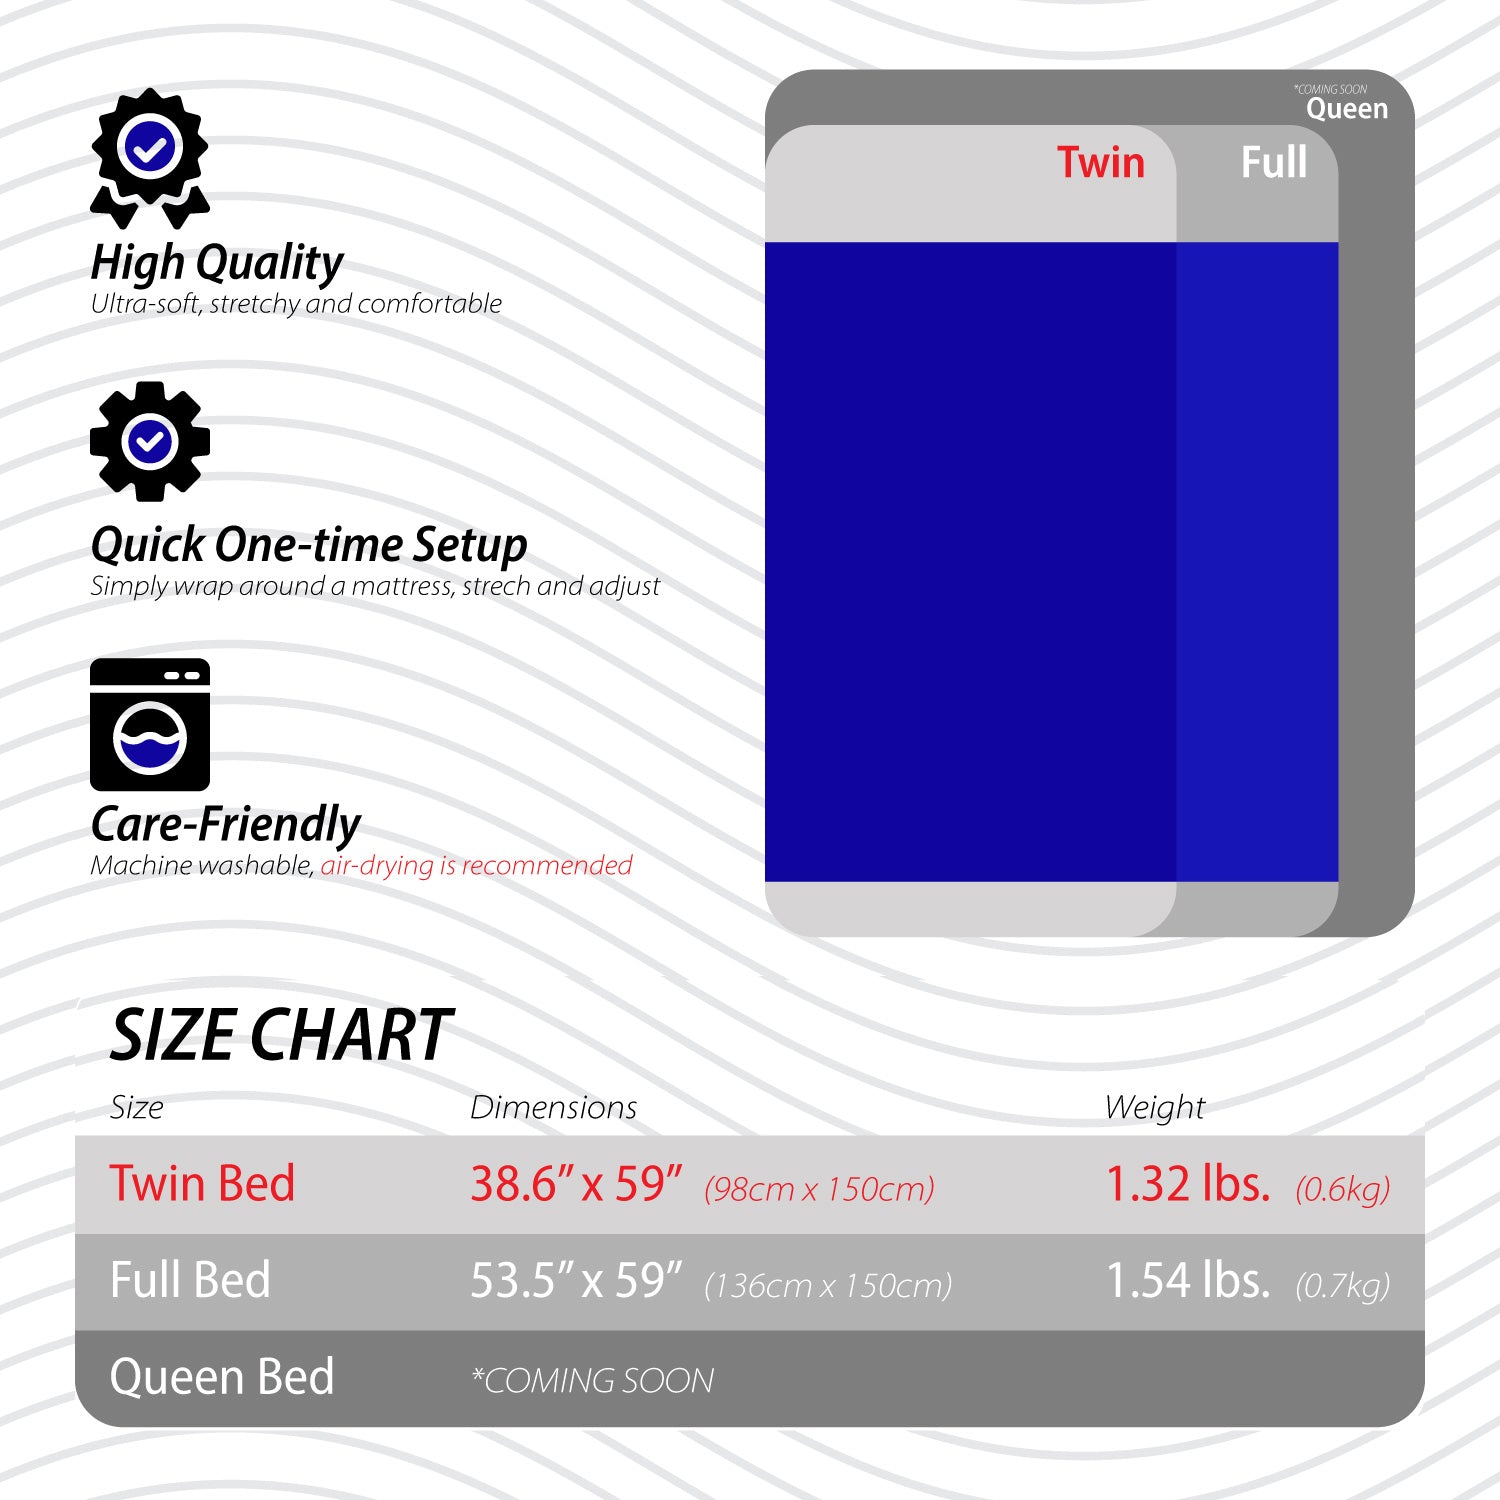 SleepKeeper Sensory Compression Blanket for Kids (Twin Size) - Breathable, Cool & Stretchy Lycra Bed Sheets for Boys, Girls & Toddlers, Promotes Deep Sleep, Best Alternative to Weighted Blankets, Blue